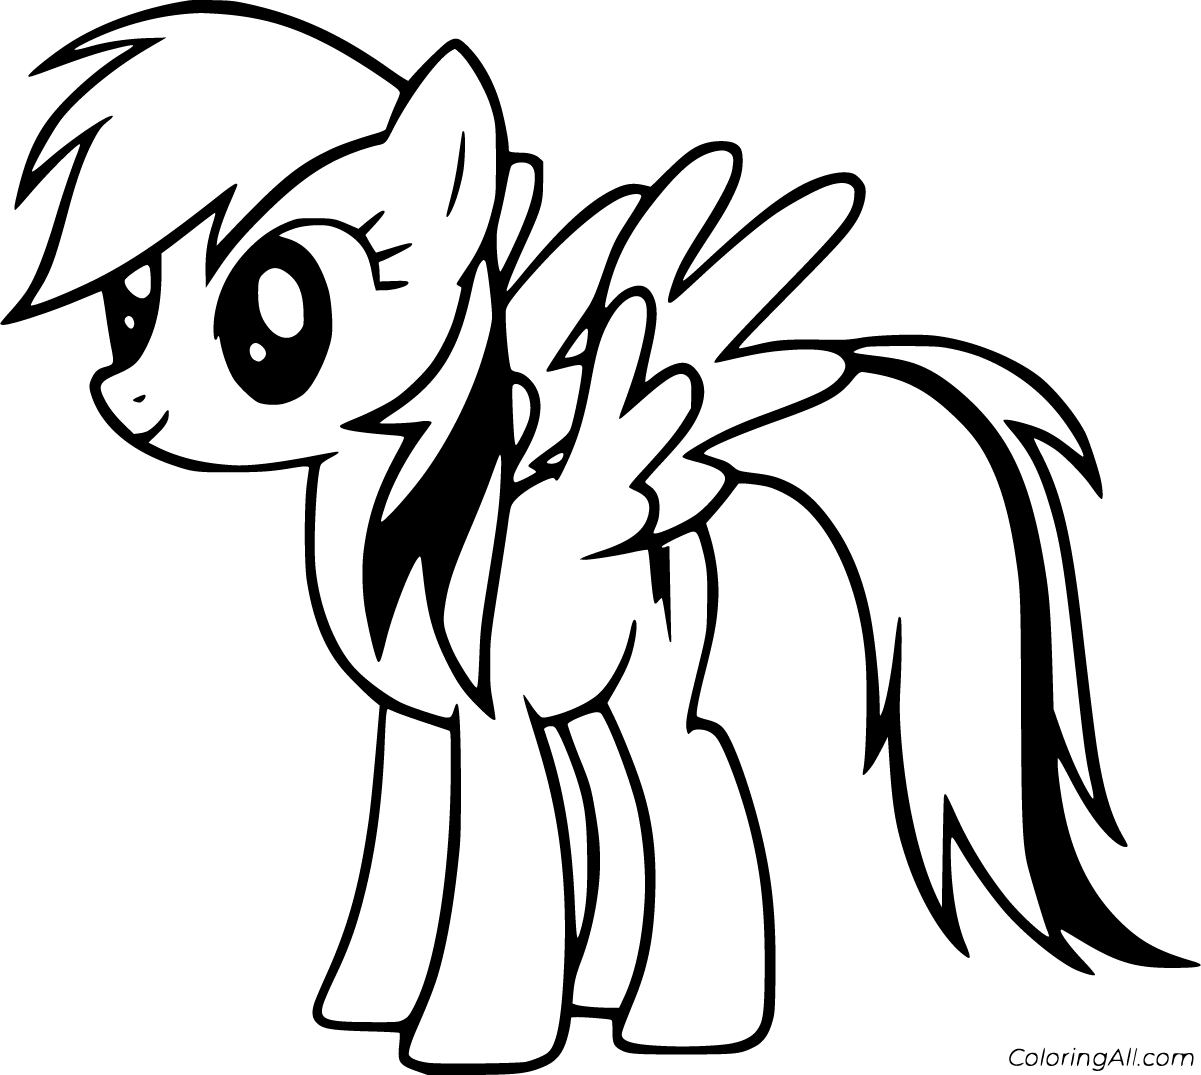 Rainbow Dash Coloring Pages   ColoringAll